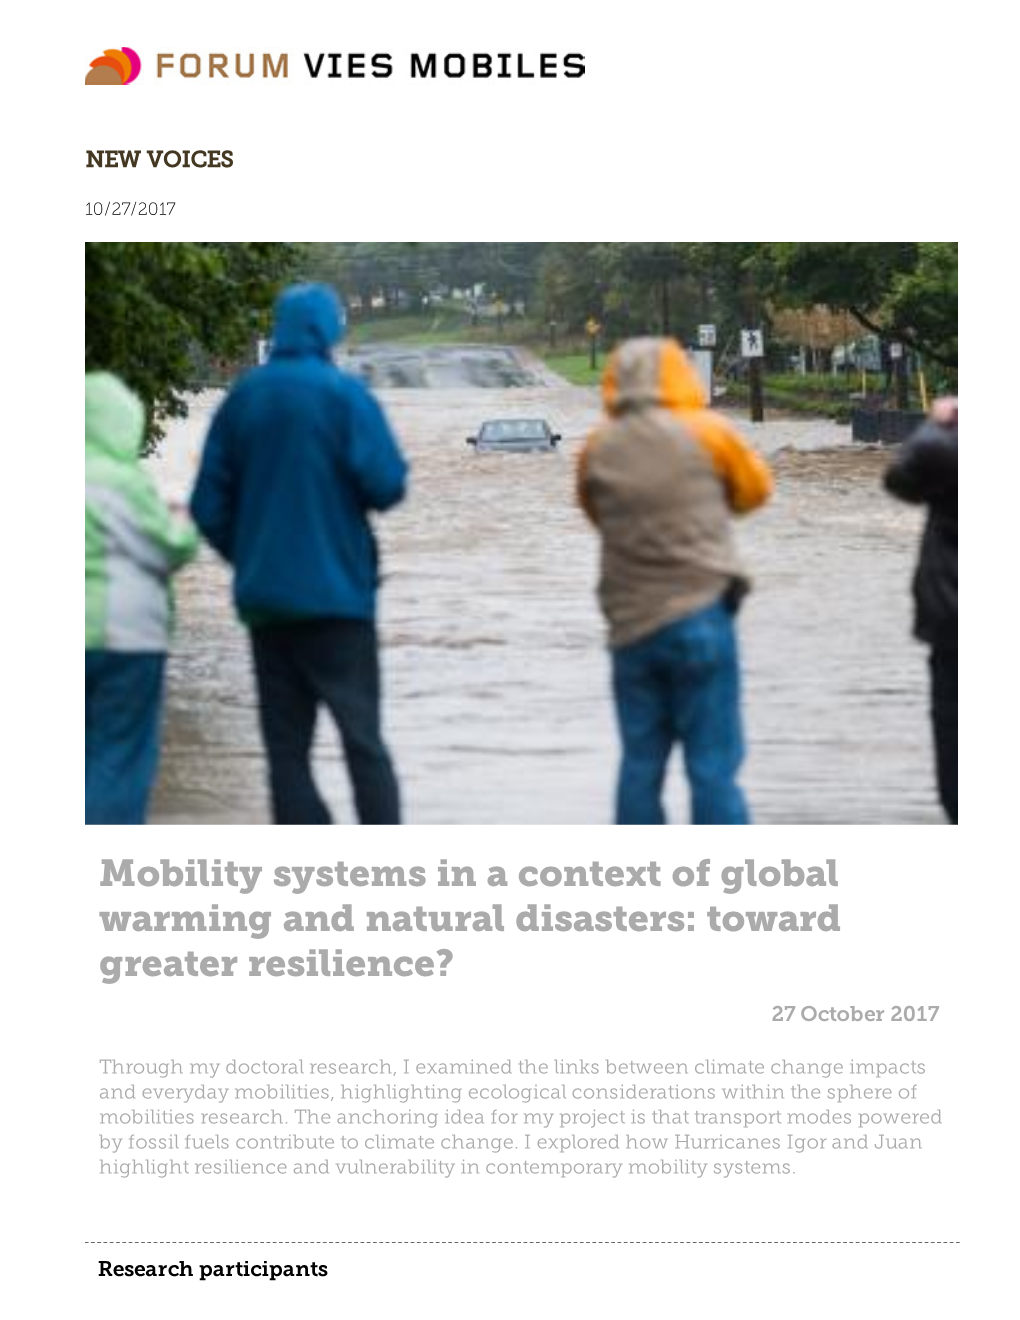 Mobility Systems in a Context of Global Warming and Natural Disasters: Toward Greater Resilience? 27 October 2017